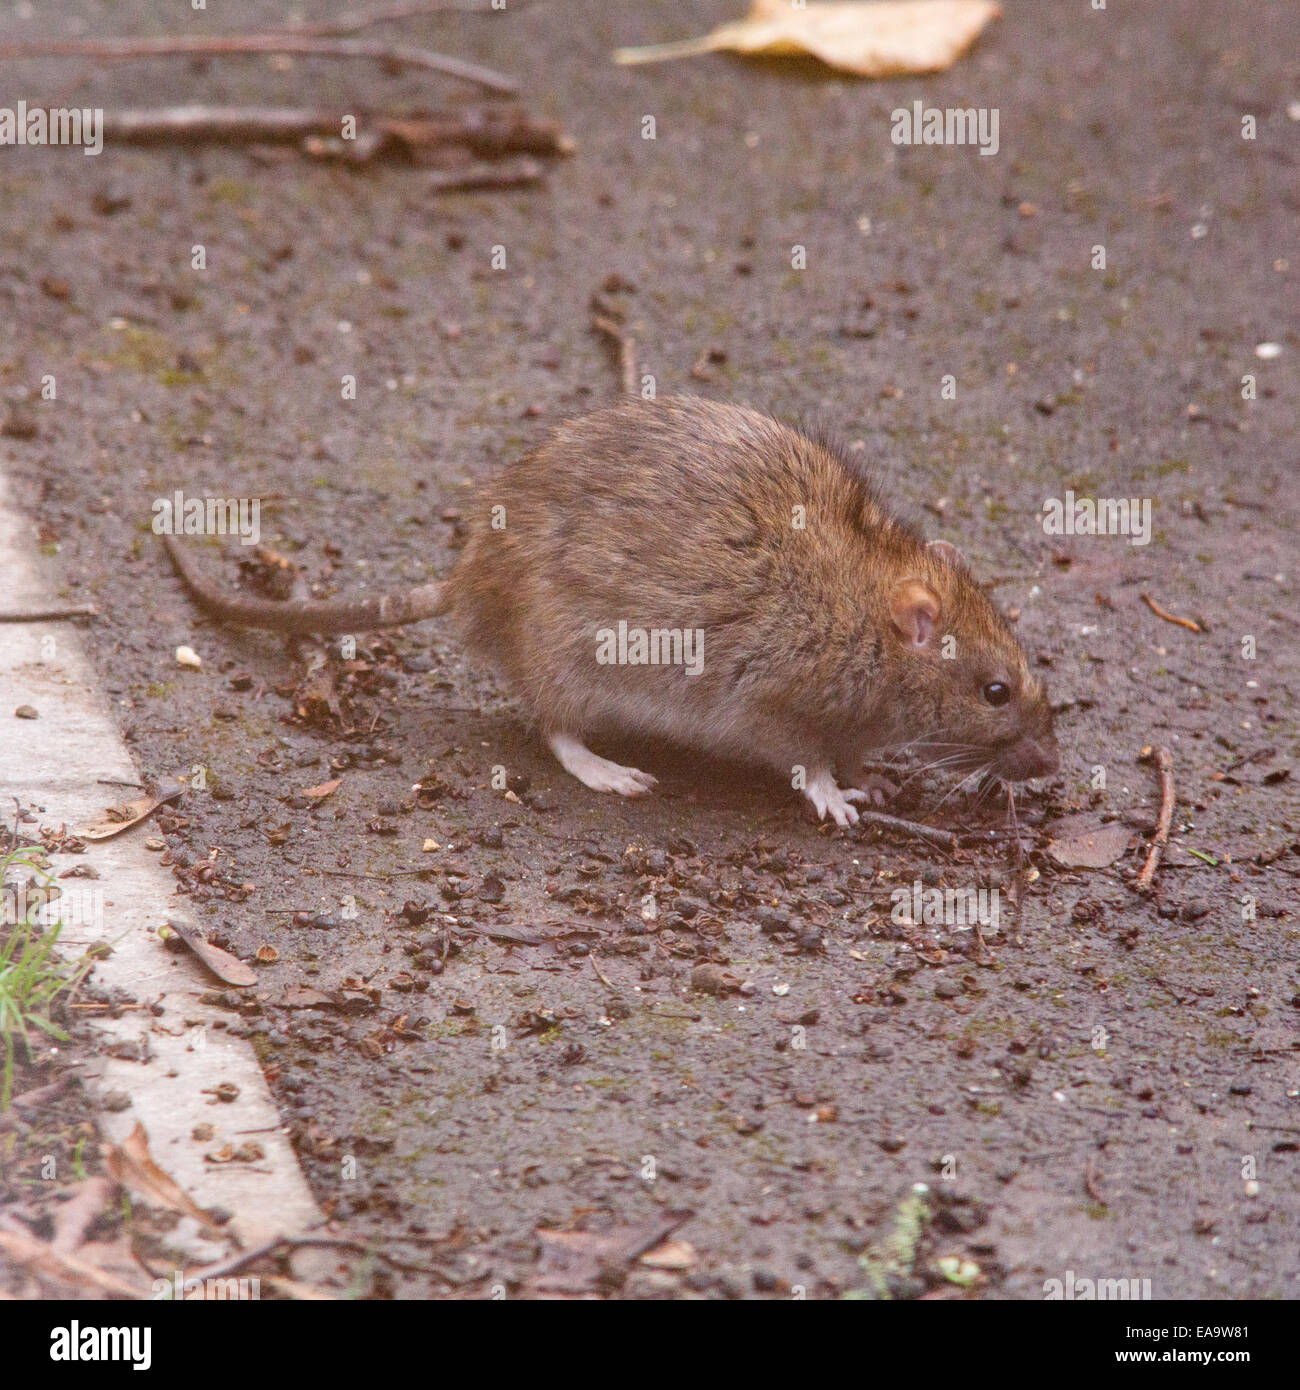 Common brown Rat ( Rattus norvegicus) also known as a Norway rat, Winchester,Hampshire, England, United Kingdom. Stock Photo